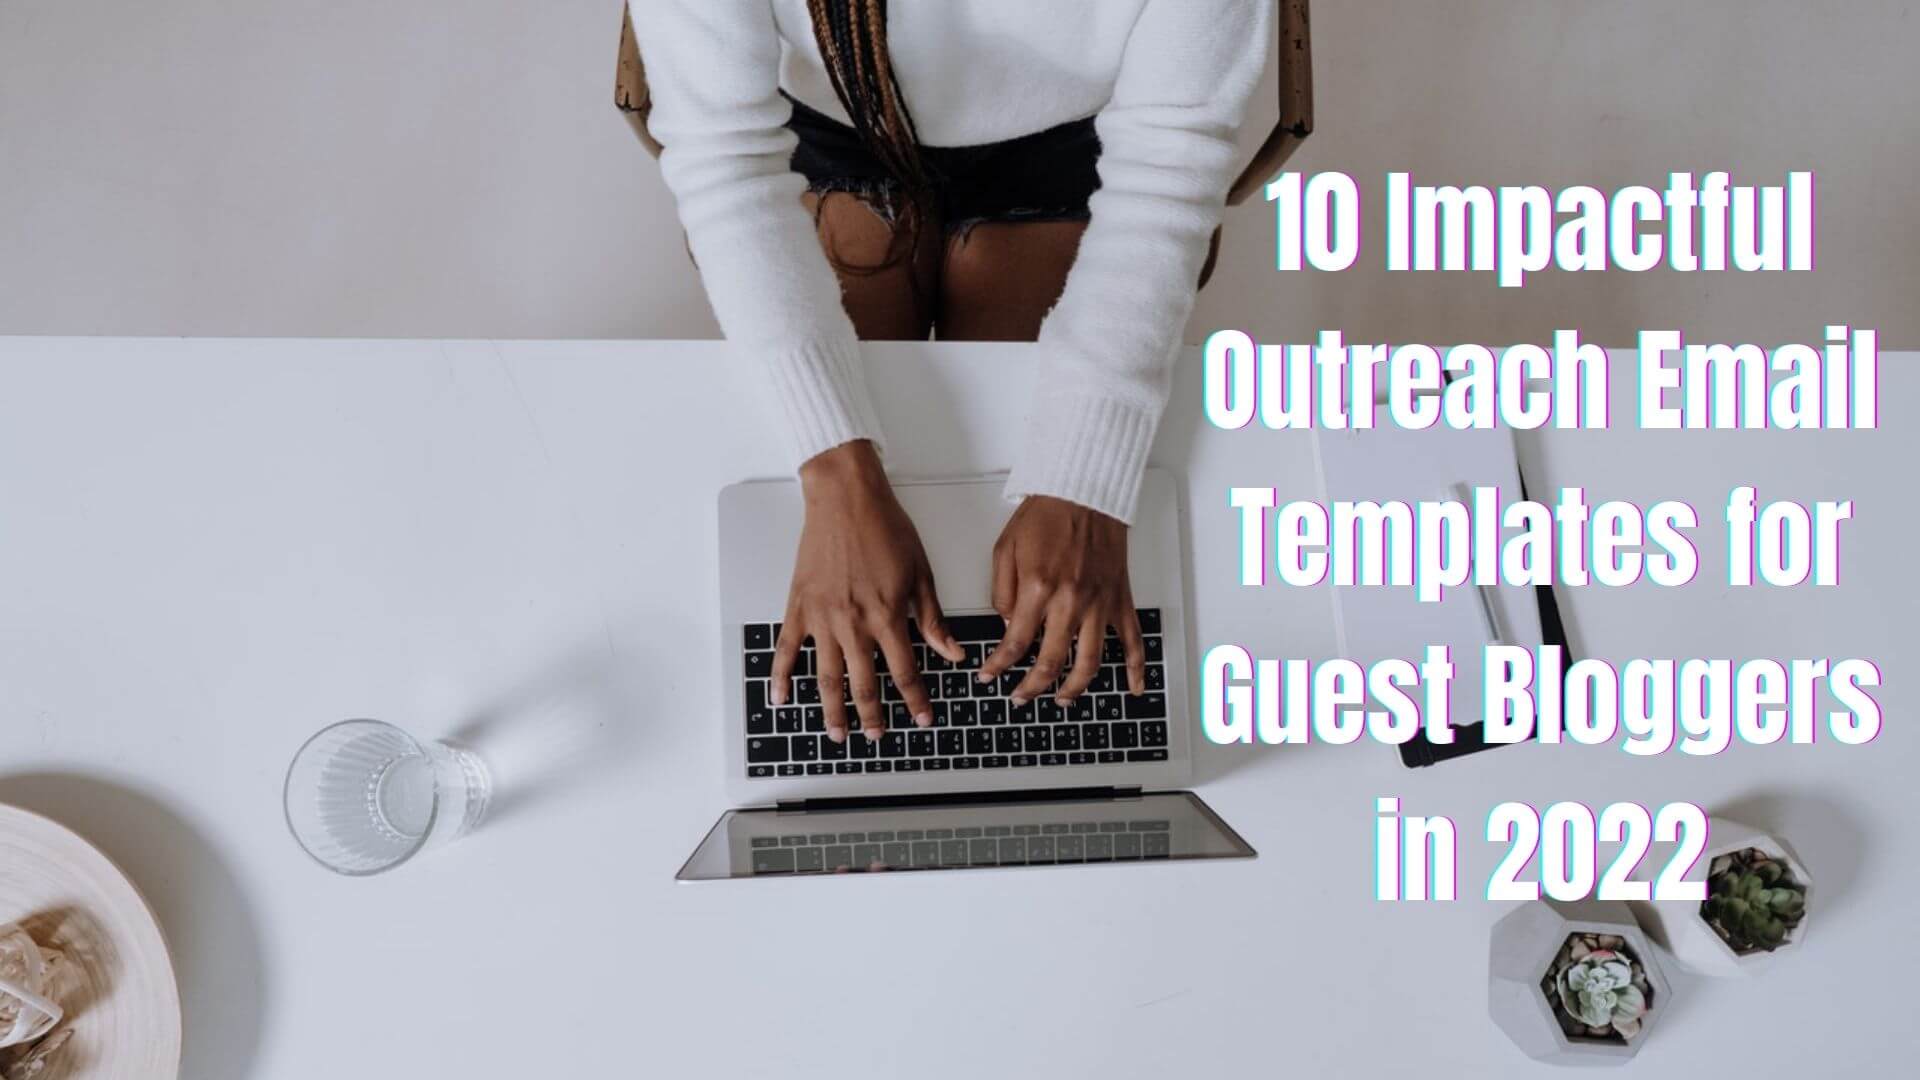 10 Impactful Outreach Email Templates for Guest Bloggers in 2022